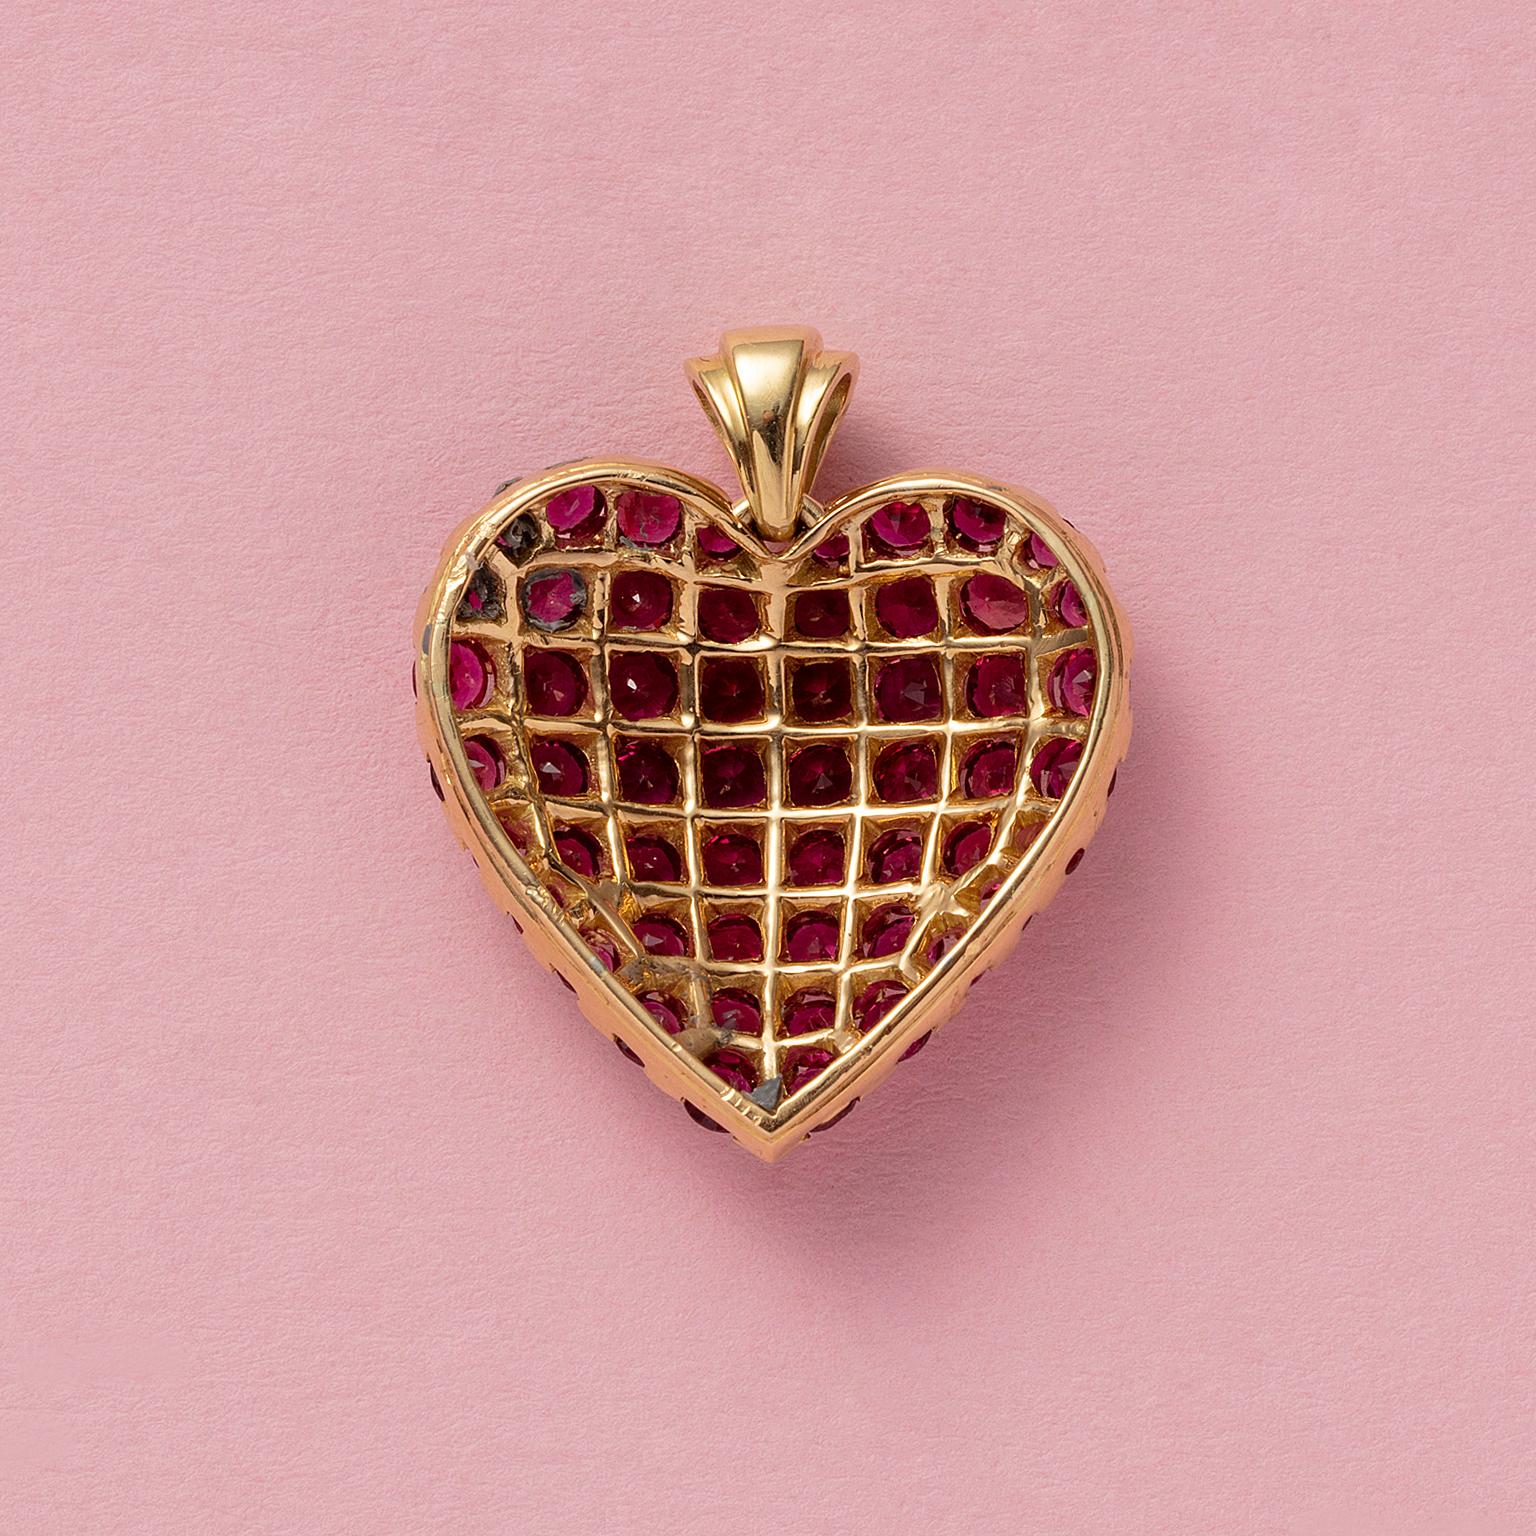 Brilliant Cut Gold Heart Pendant with Rubies and Diamonds